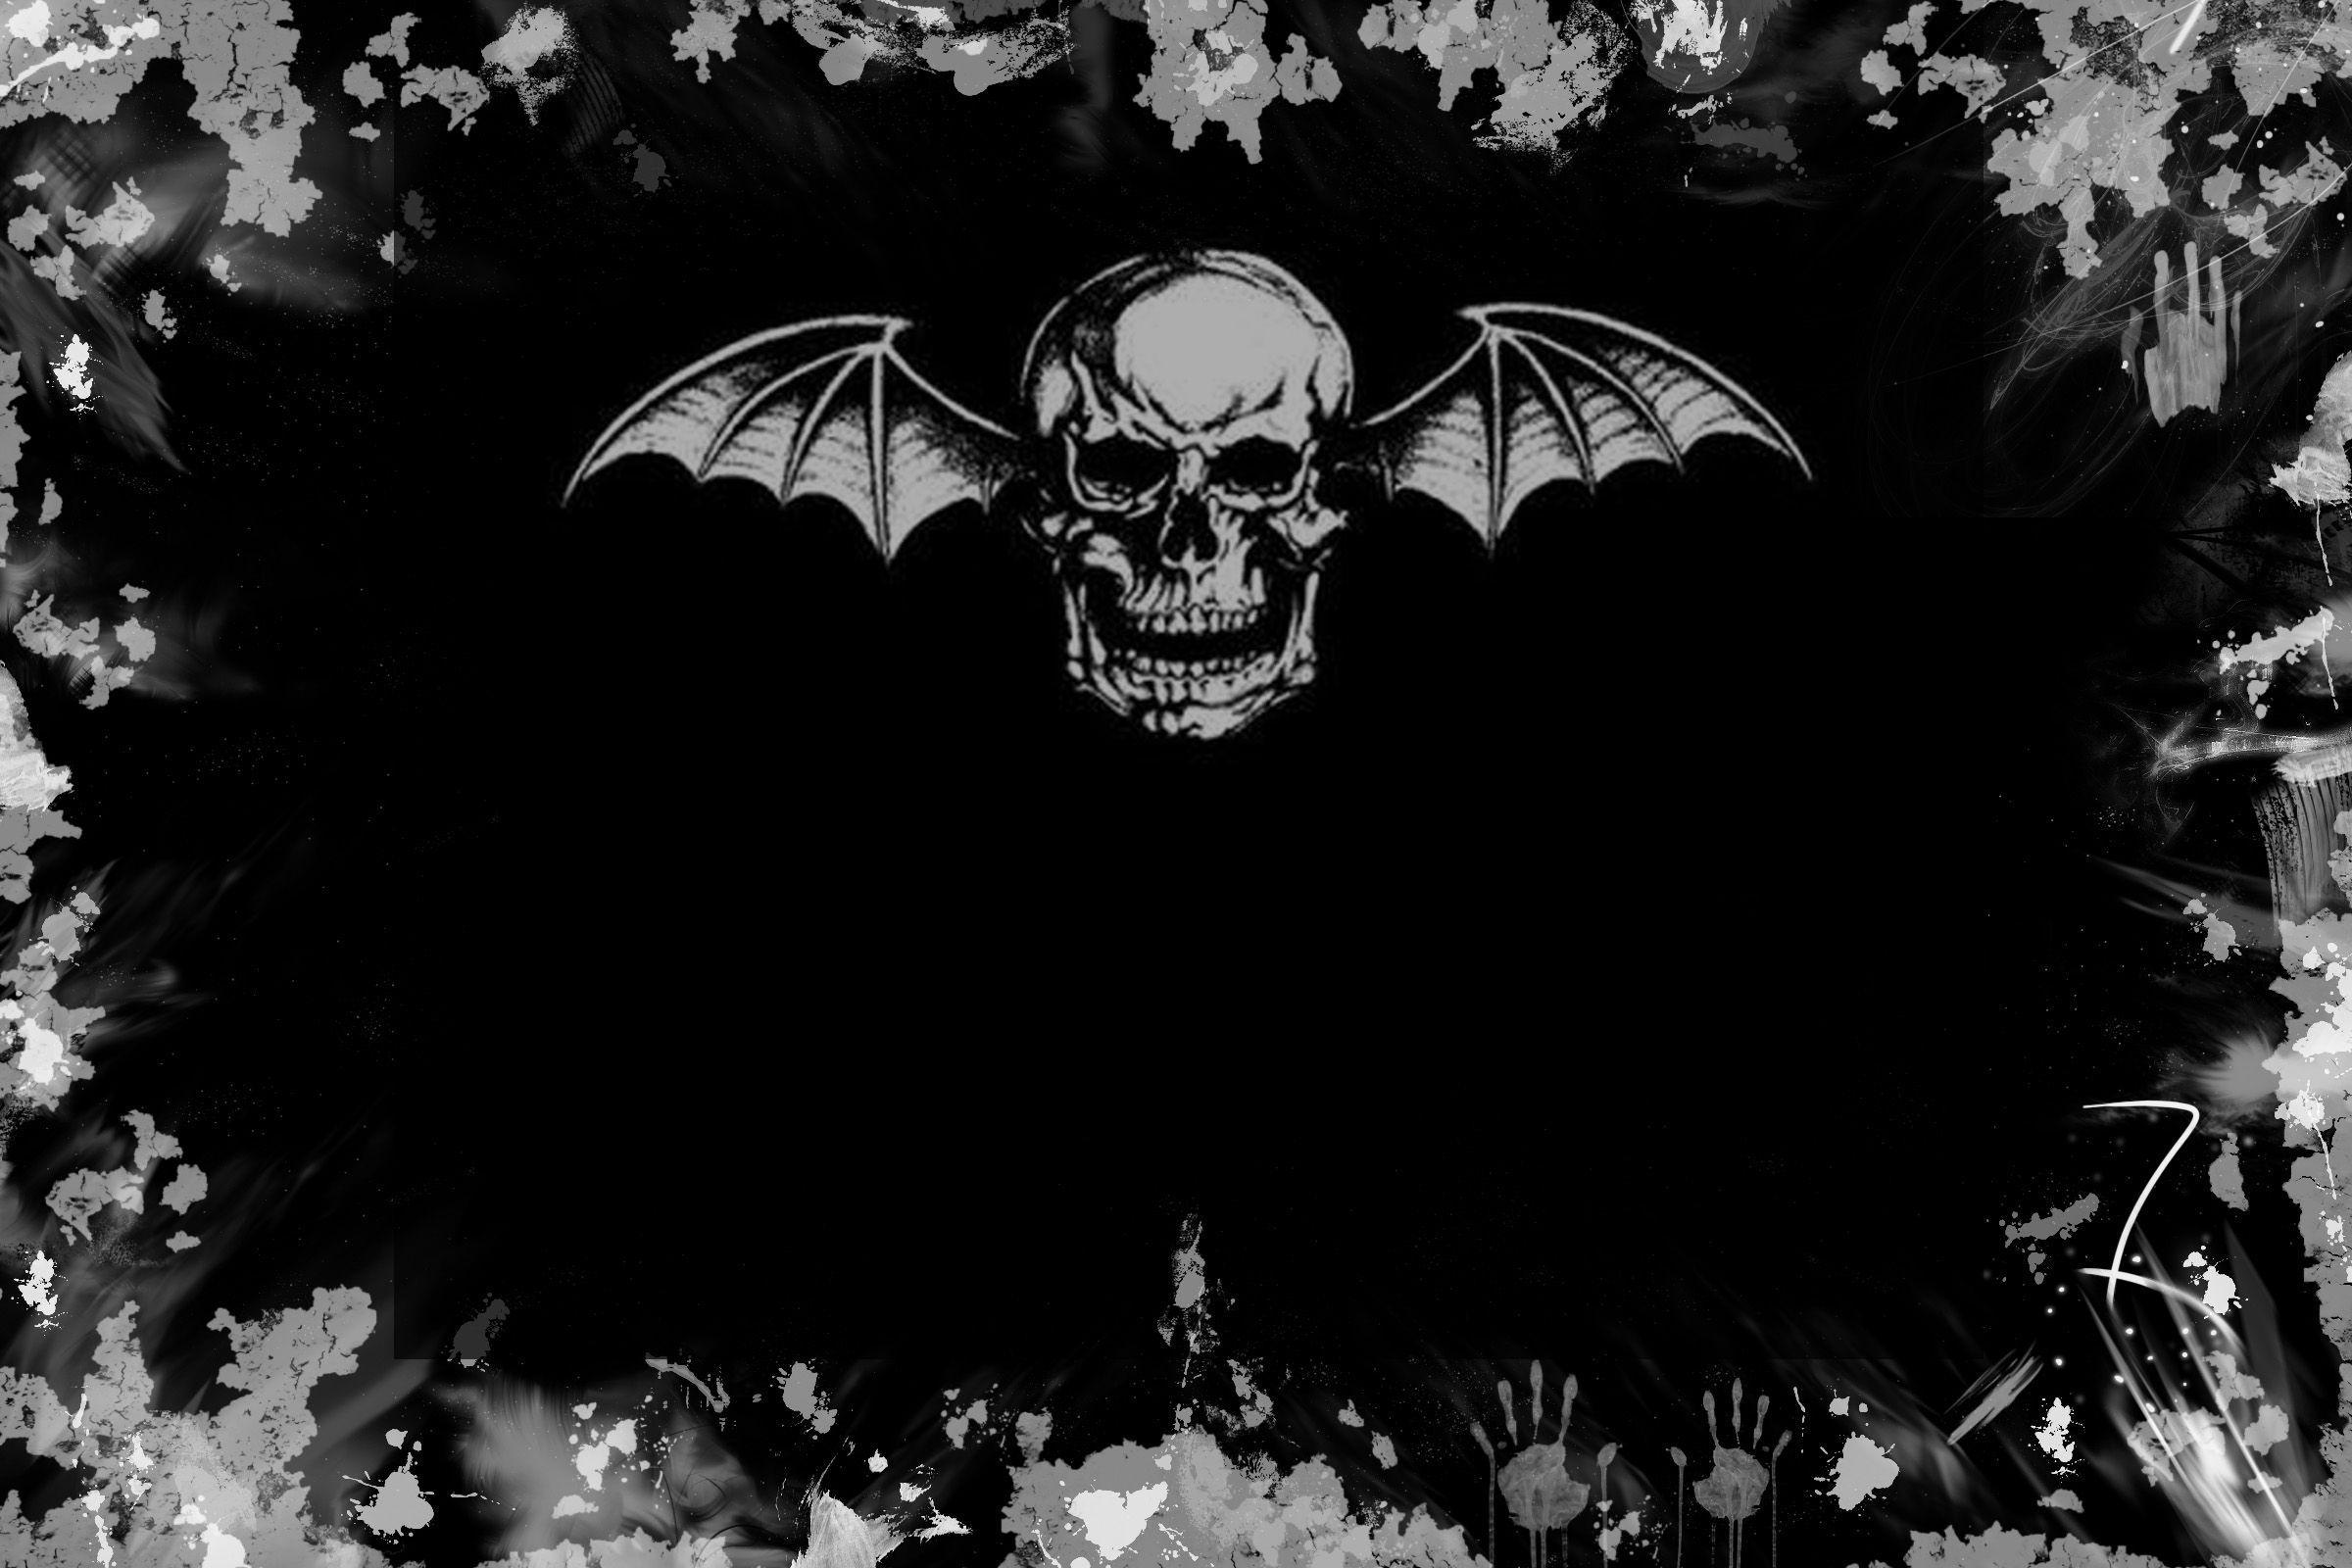 Avenged Sevenfold 2015 Wallpapers - Wallpaper Cave